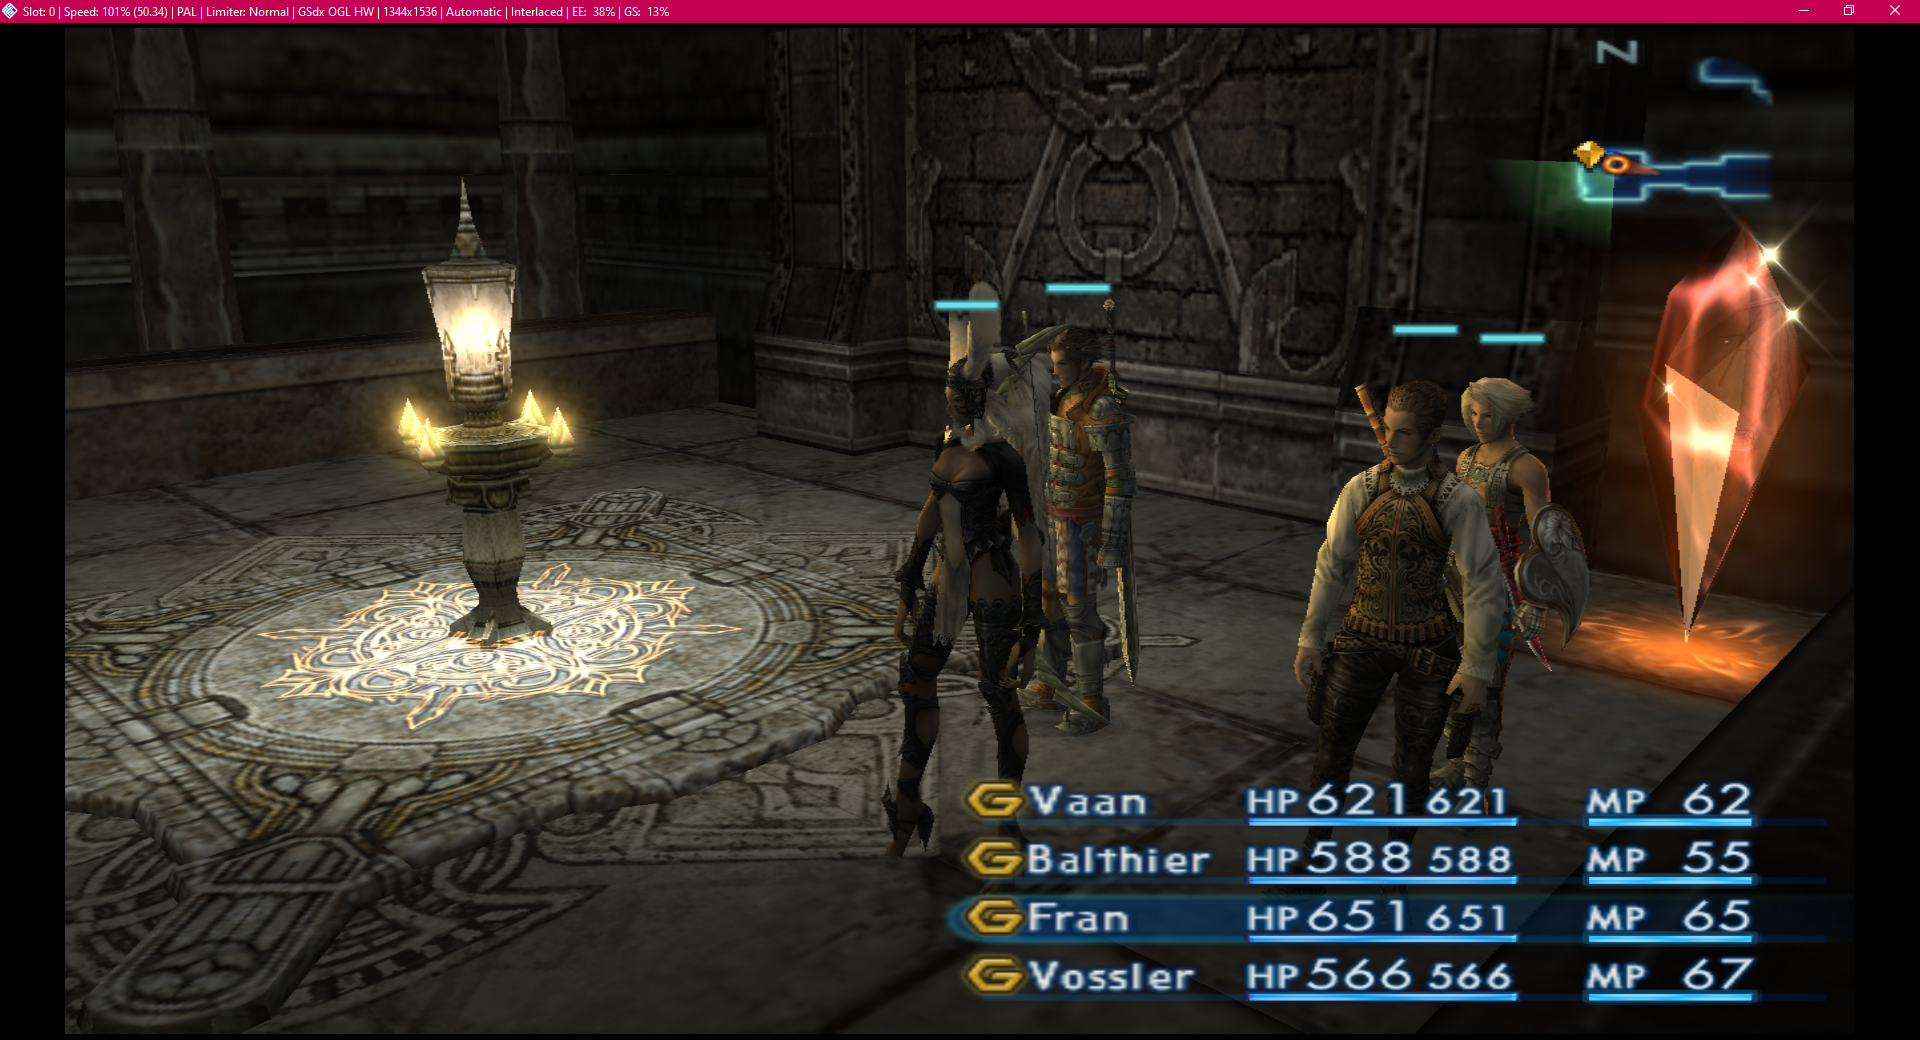 Screenshot of a 1080p widescreen PCSX2 window on Windows 10, showing FINAL FANTASY® XII running at 1344x1536, showing an in-game scene where the characters Vaan (HP 621/621, MP 62), Balthier (HP 588/588, MP 55), Fran (HP 651/651, MP 65) and Vossler (HP 566/566, MP 67) are standing at the entrance of The Tomb of Raithwall. The image is much clearer and sharper than on the CRT.